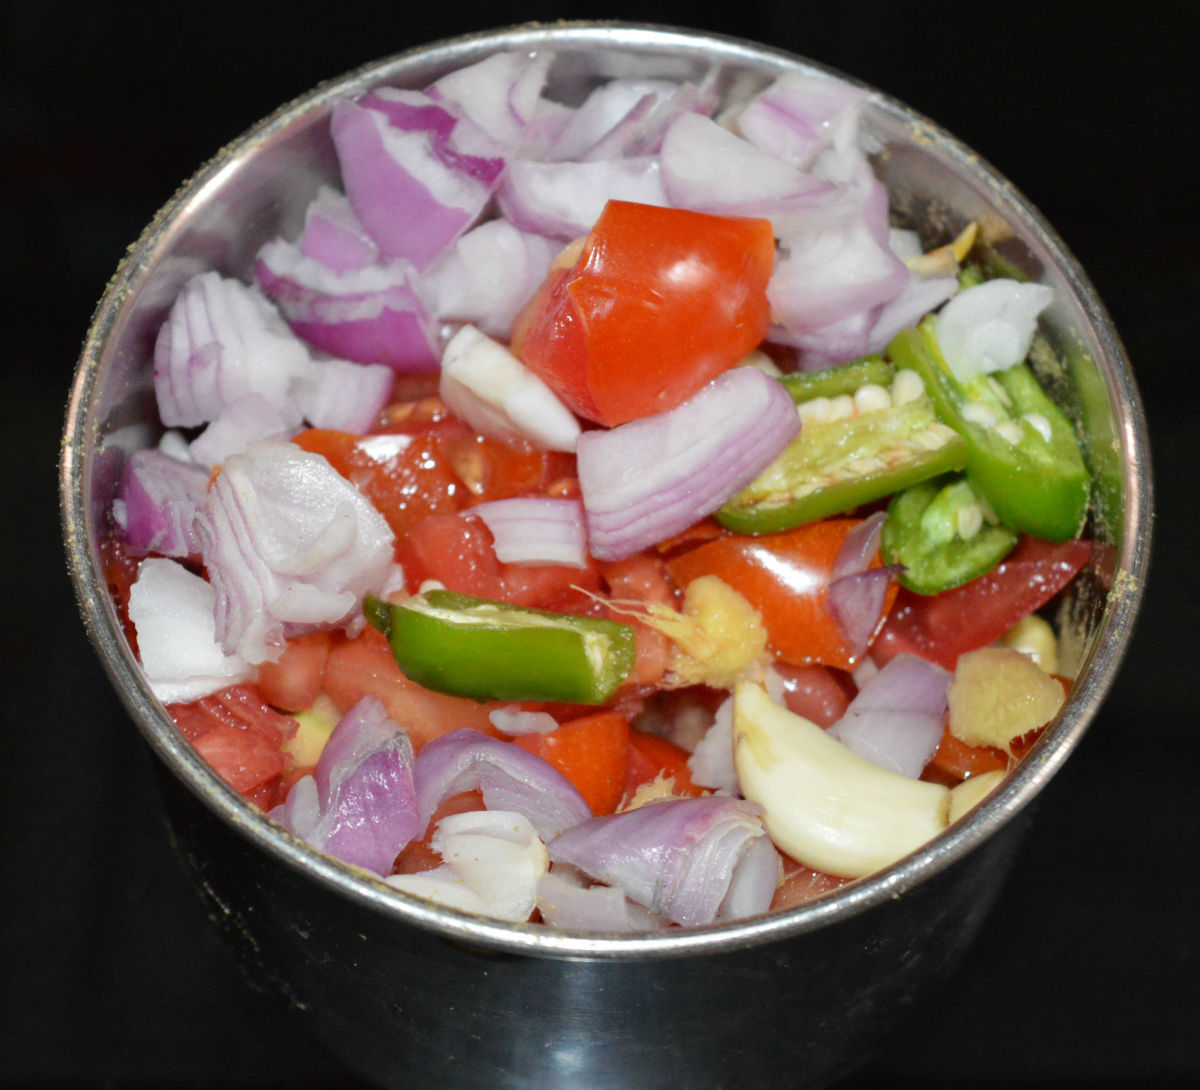 Step one: Grind chopped tomatoes, onions, garlic, ginger, and green chilies to make a paste.